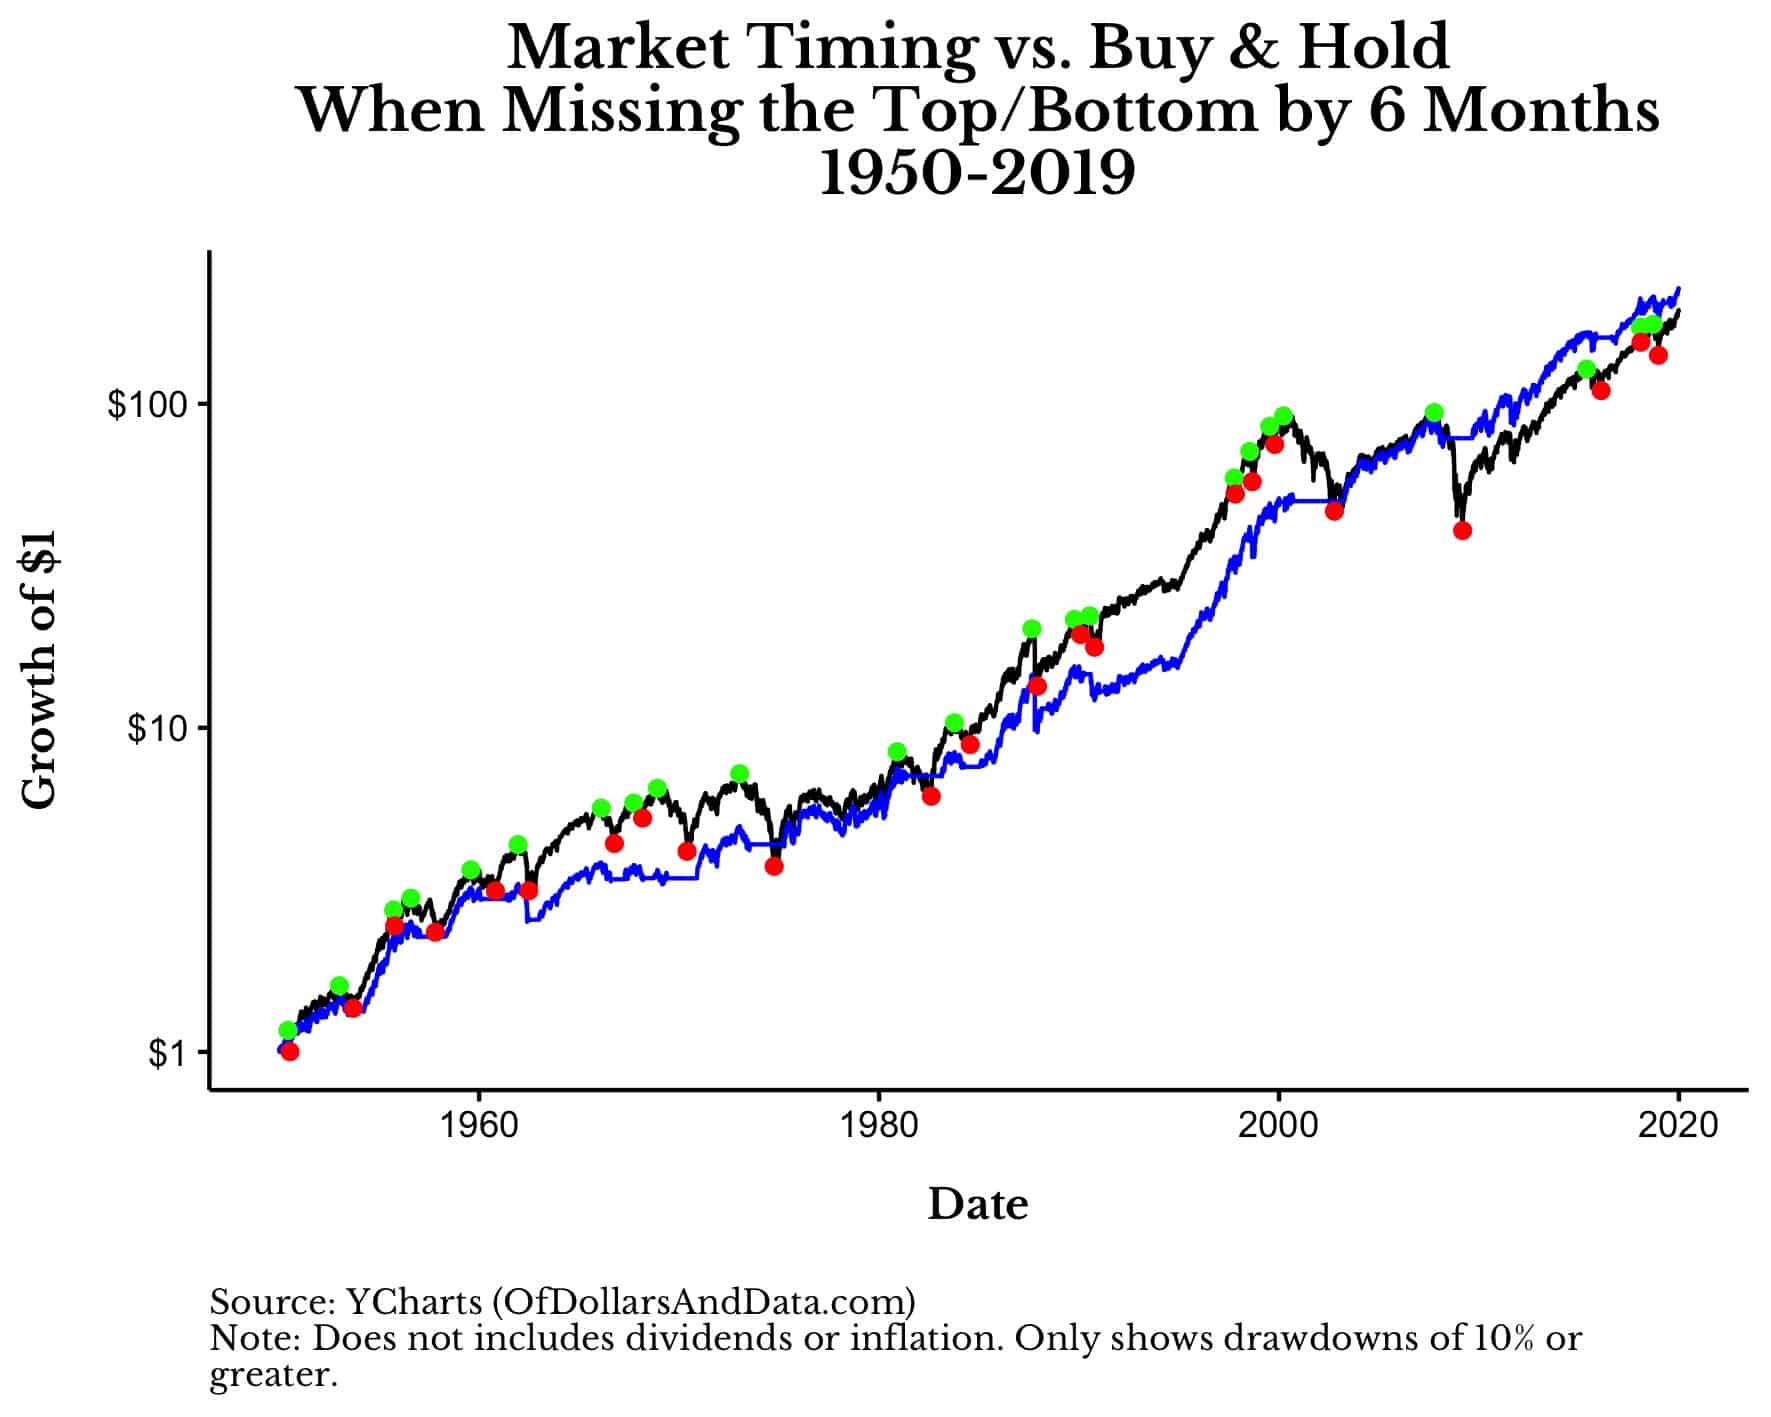 Market timing vs Buy and Hold when missing the top/bottom by 6 months, 1950-2019